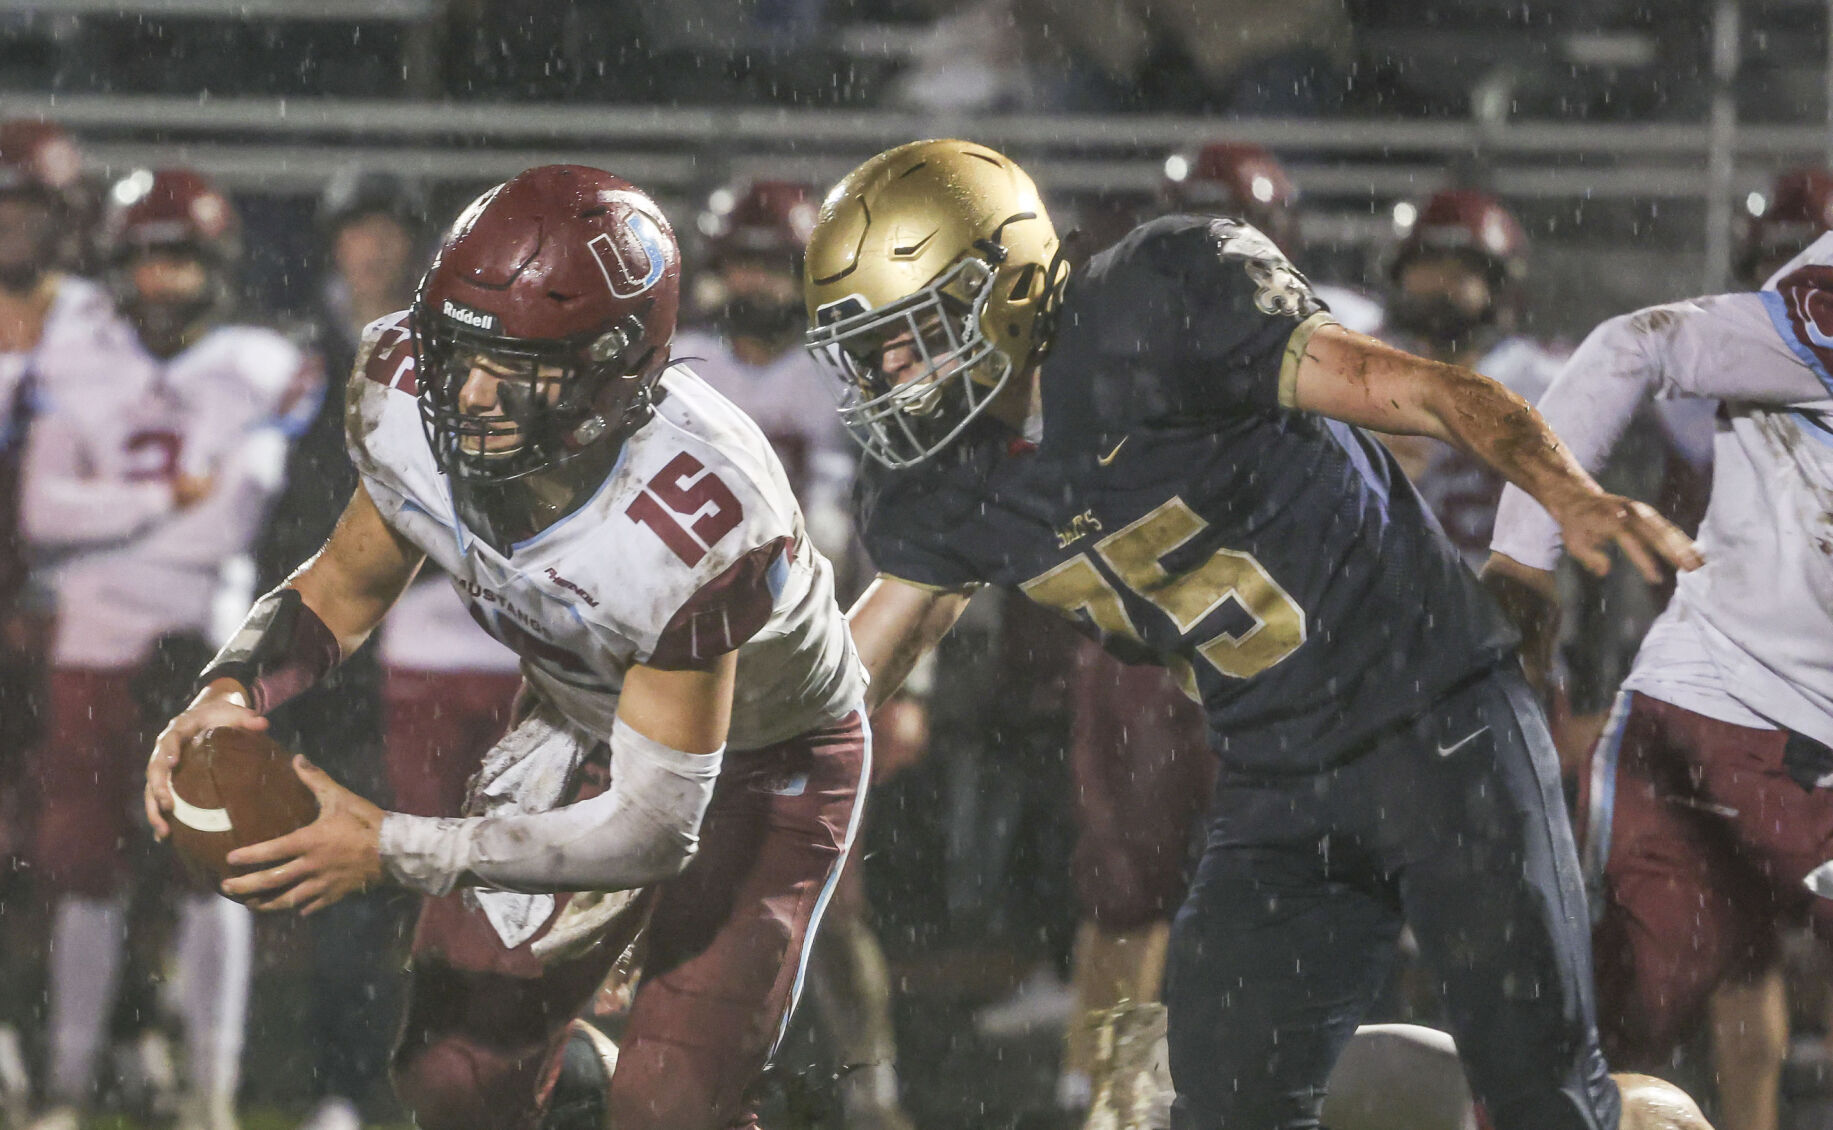 Central Catholic High School Domines Unity-Payson in Rain-Soaked Game, Winning 47-0